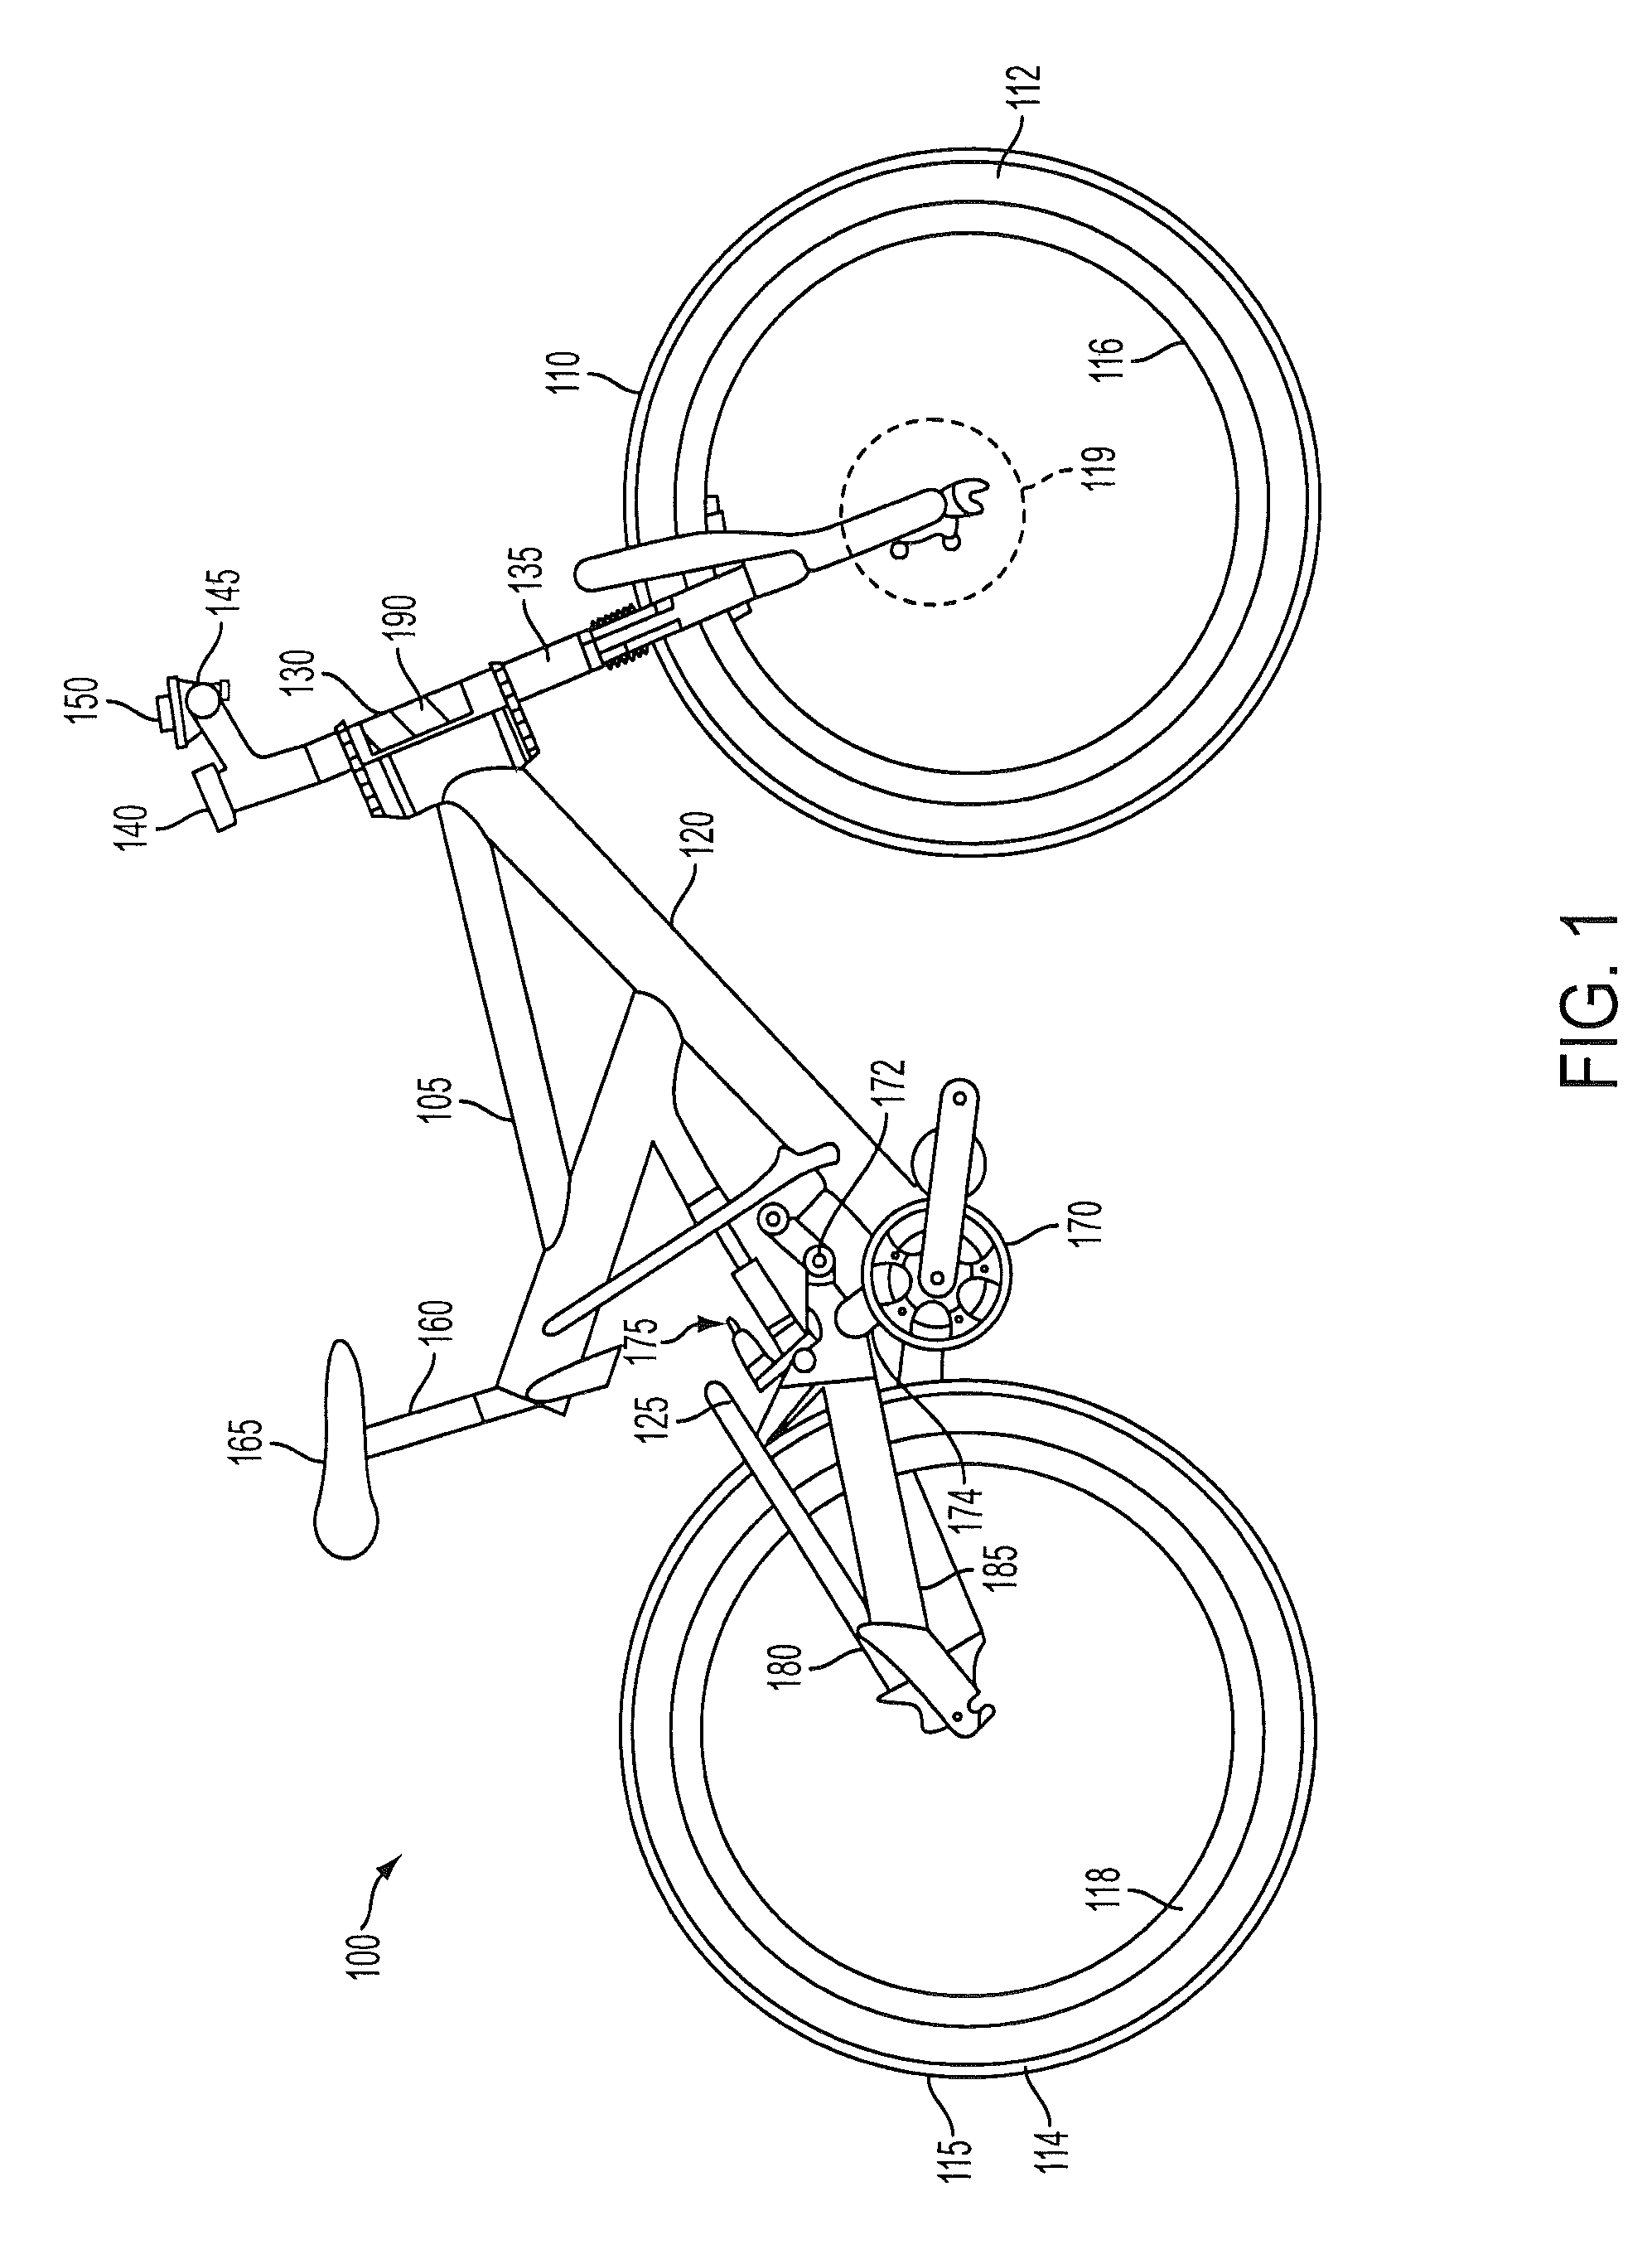 Bicycle distributed computing arrangement and method of operation